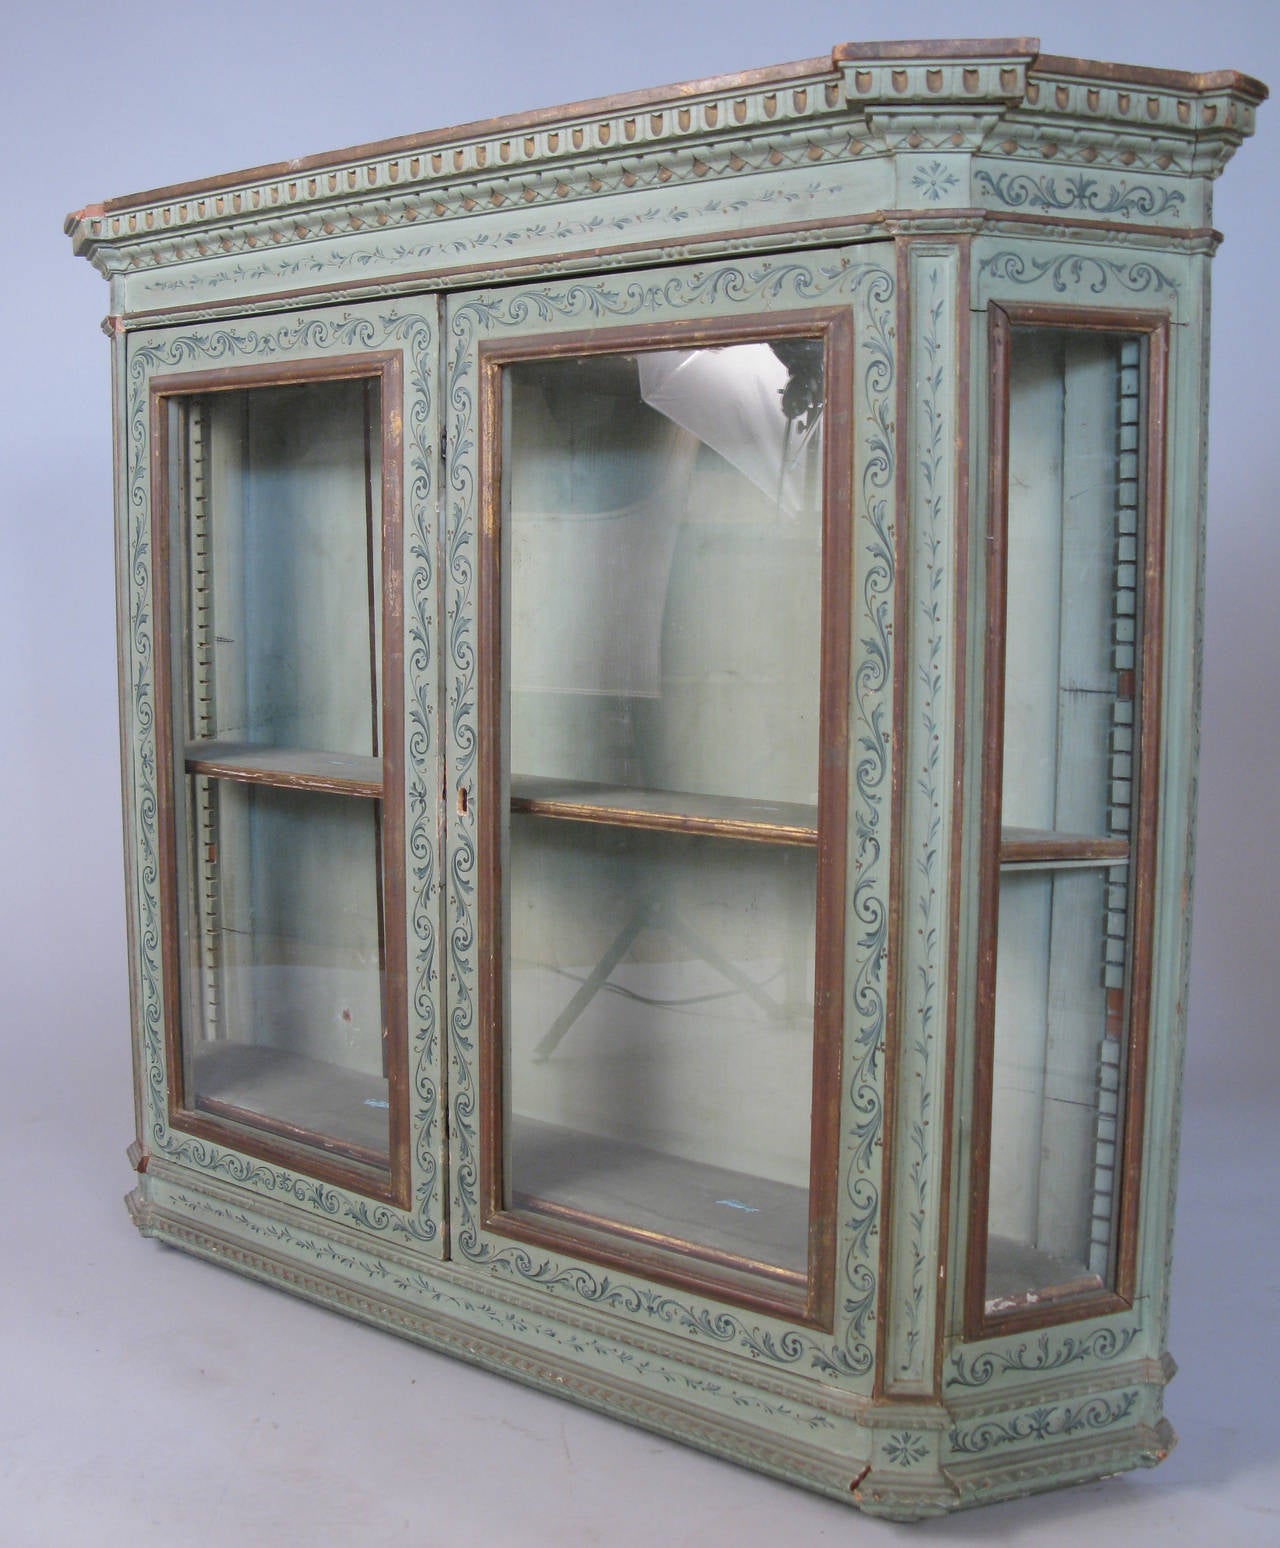 A charming Italian wall-mounted display cabinet, in its original pale green finish with hand-painted details all-over. Beautiful design with a pair of hinged glass doors, and adjustable shelves, with canted glass side panels as well.